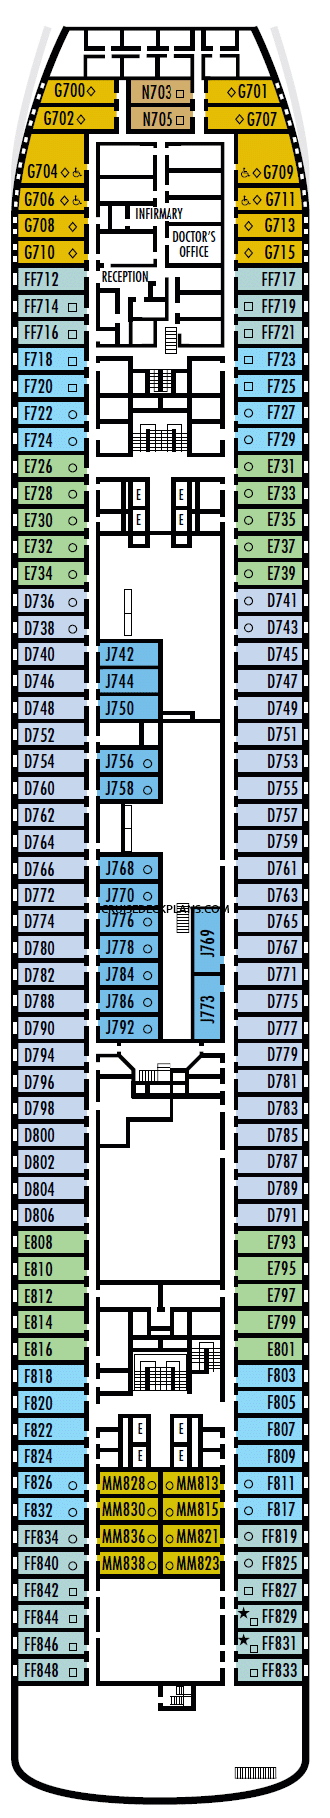 What is the deck plan for the Veendam cruise ship?